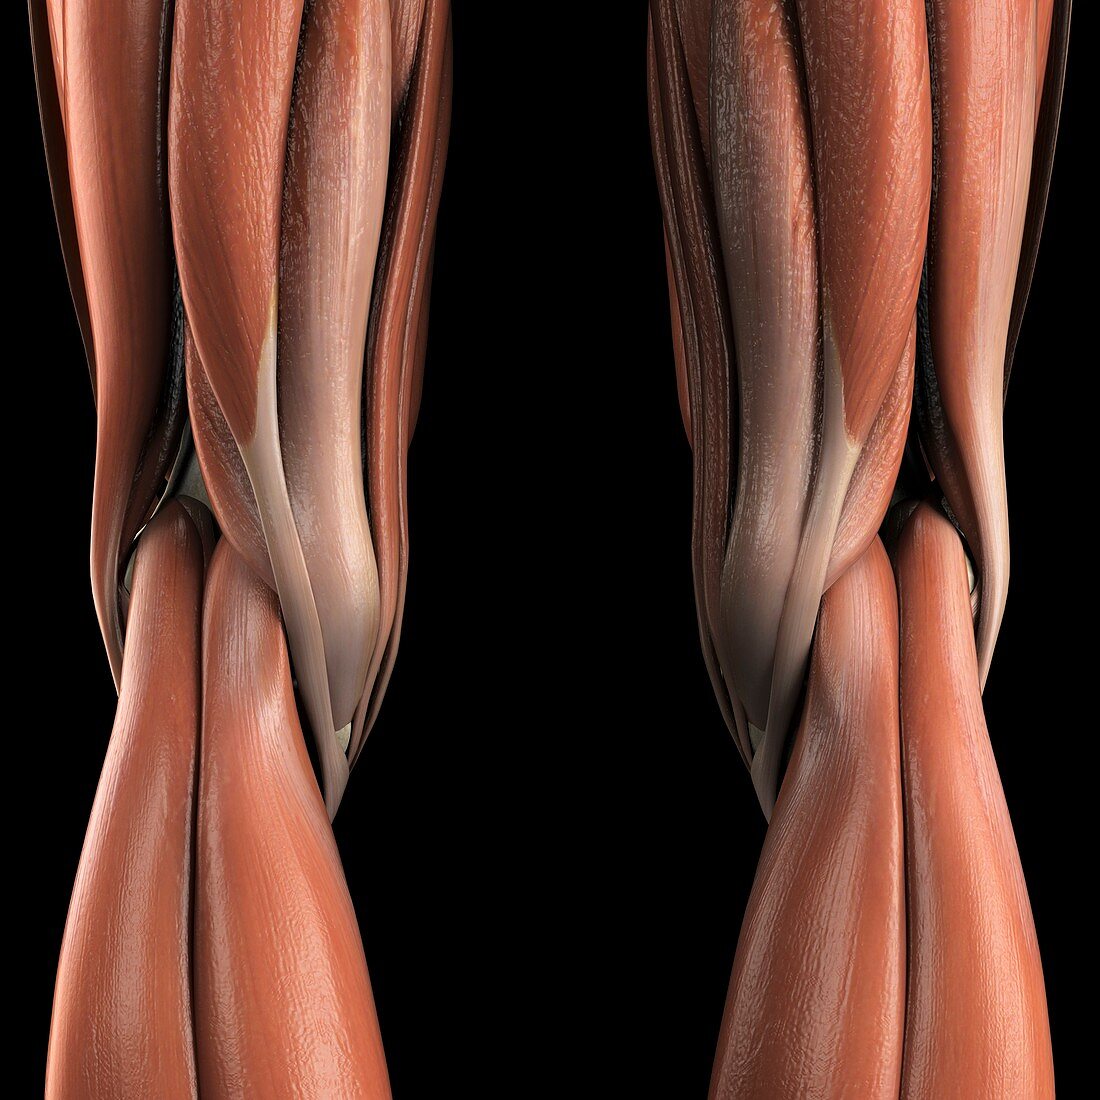 Muscles of the Knees, artwork